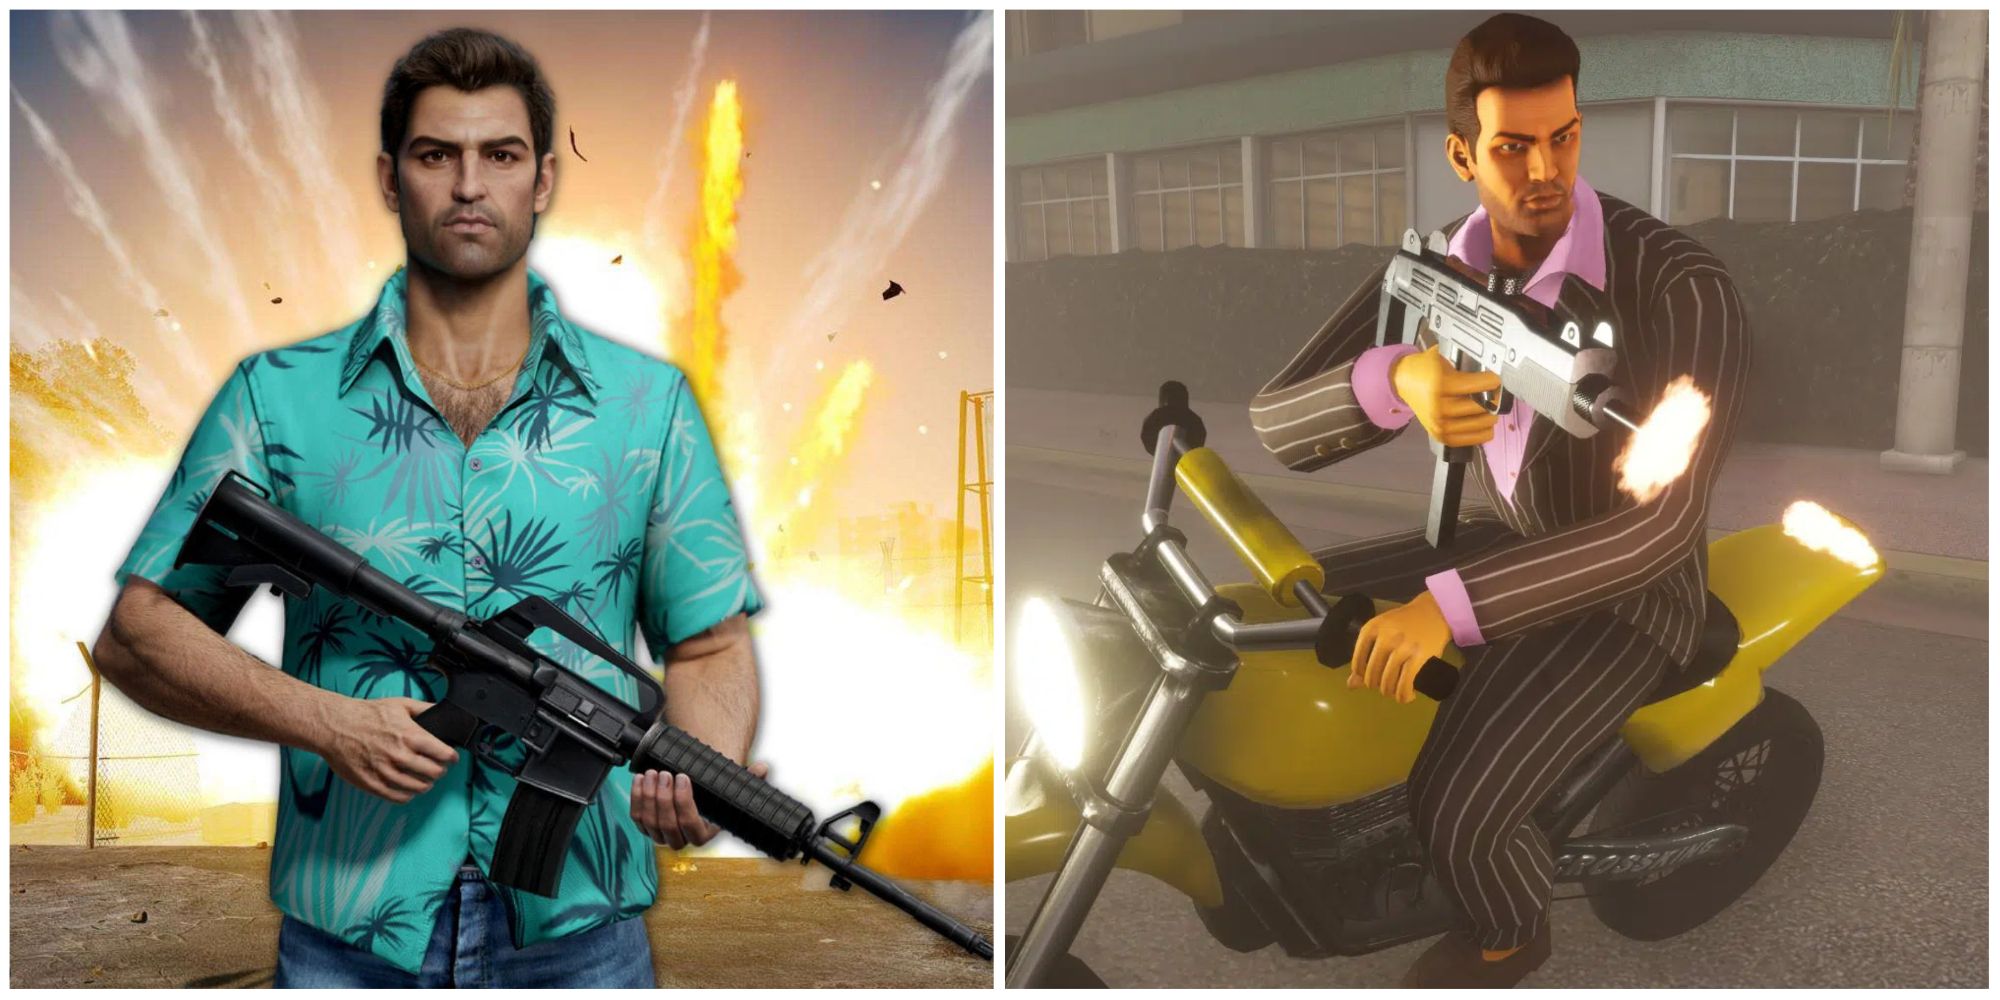 Tommy holding a gun in front of an explosion and on a motorcycle in Grand Theft Auto Vice City